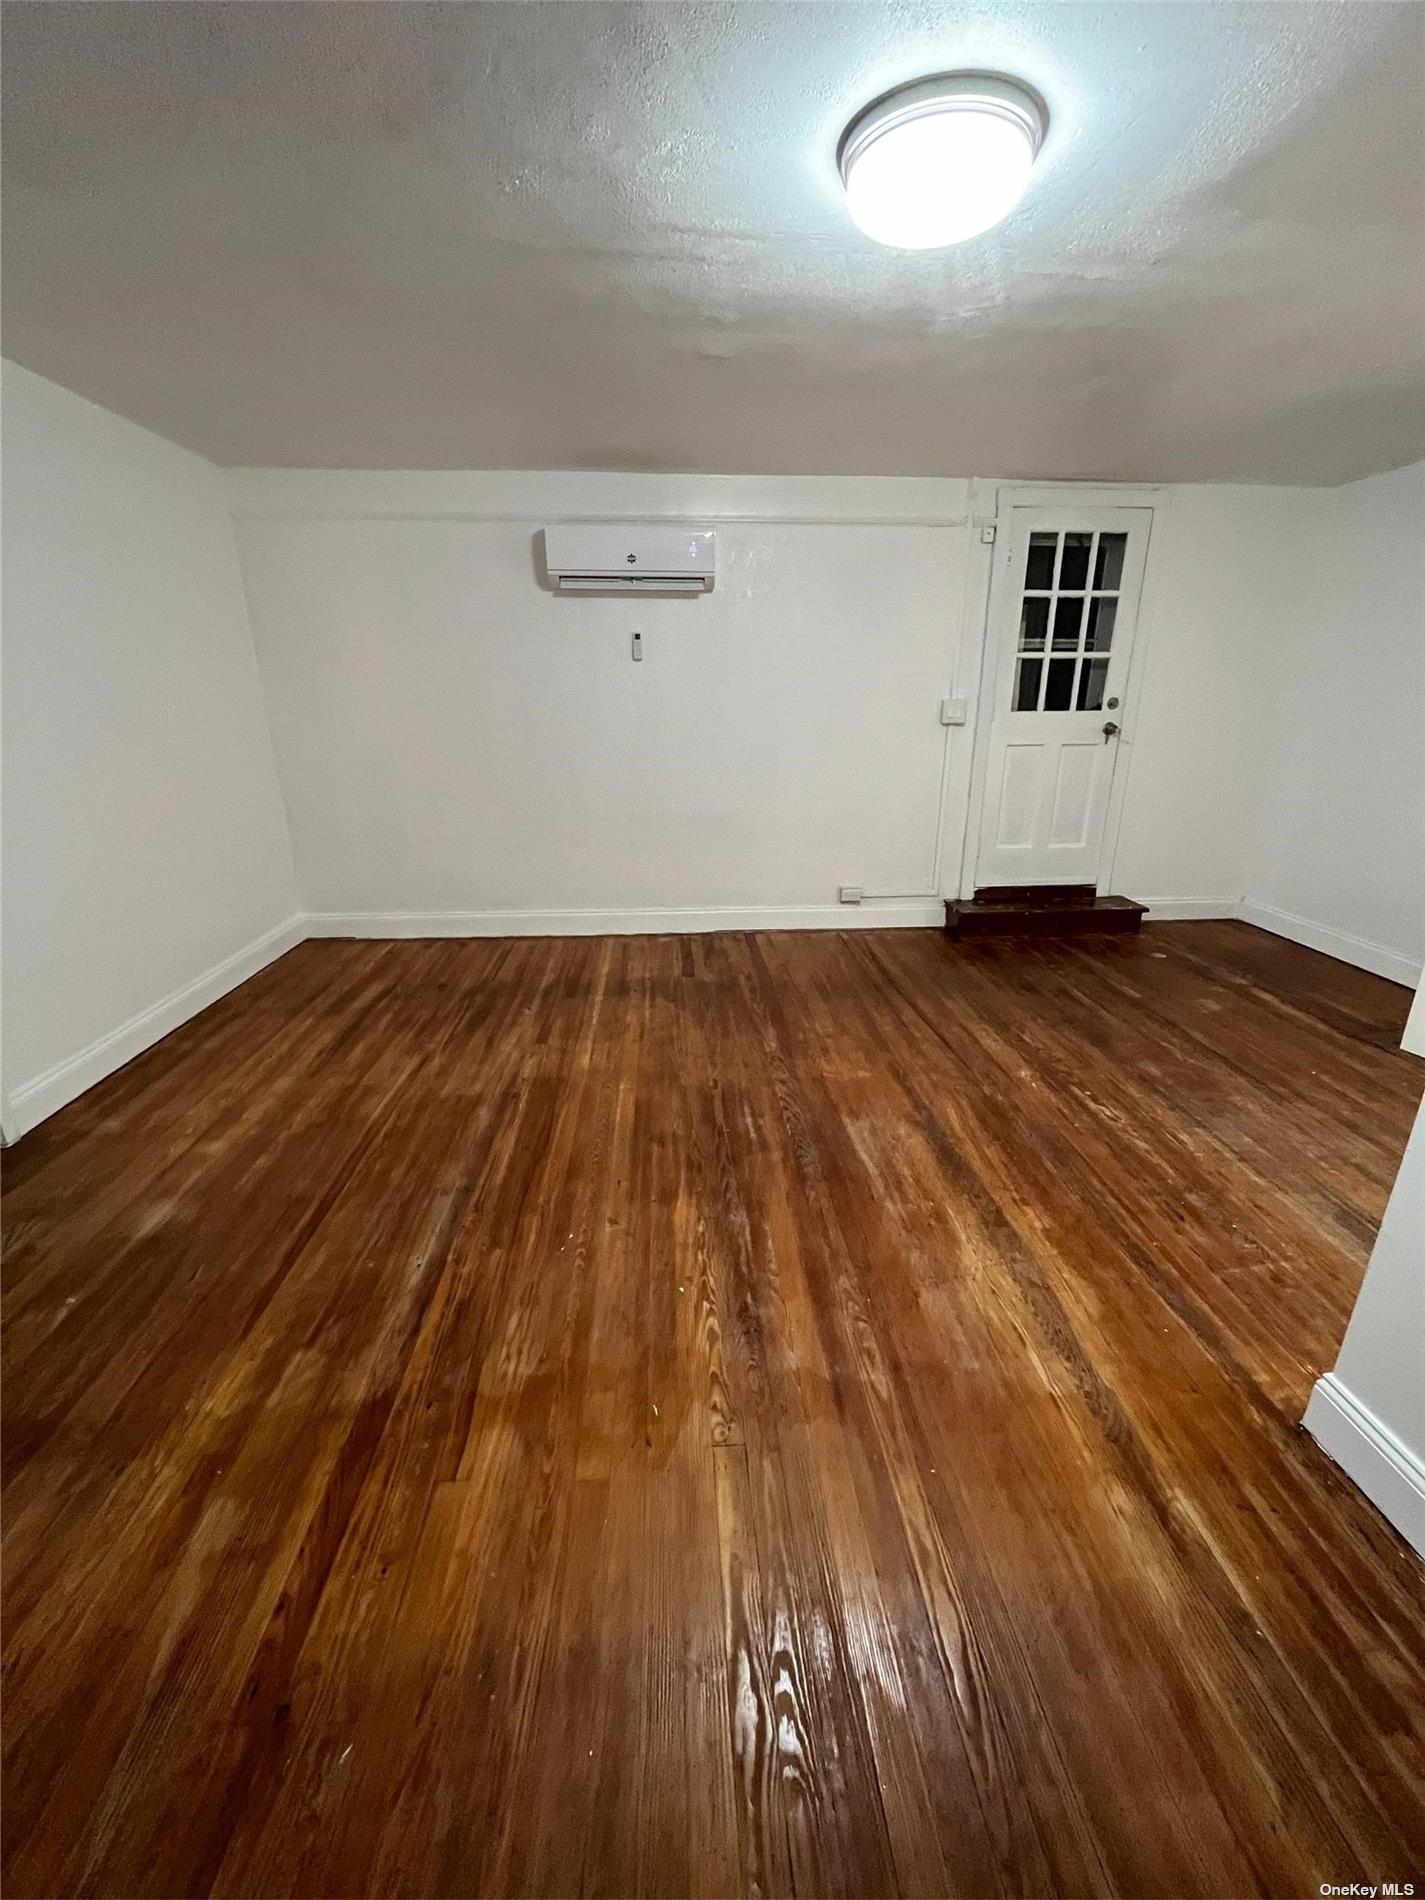 Apartment in Bronx - Hering  Bronx, NY 10469